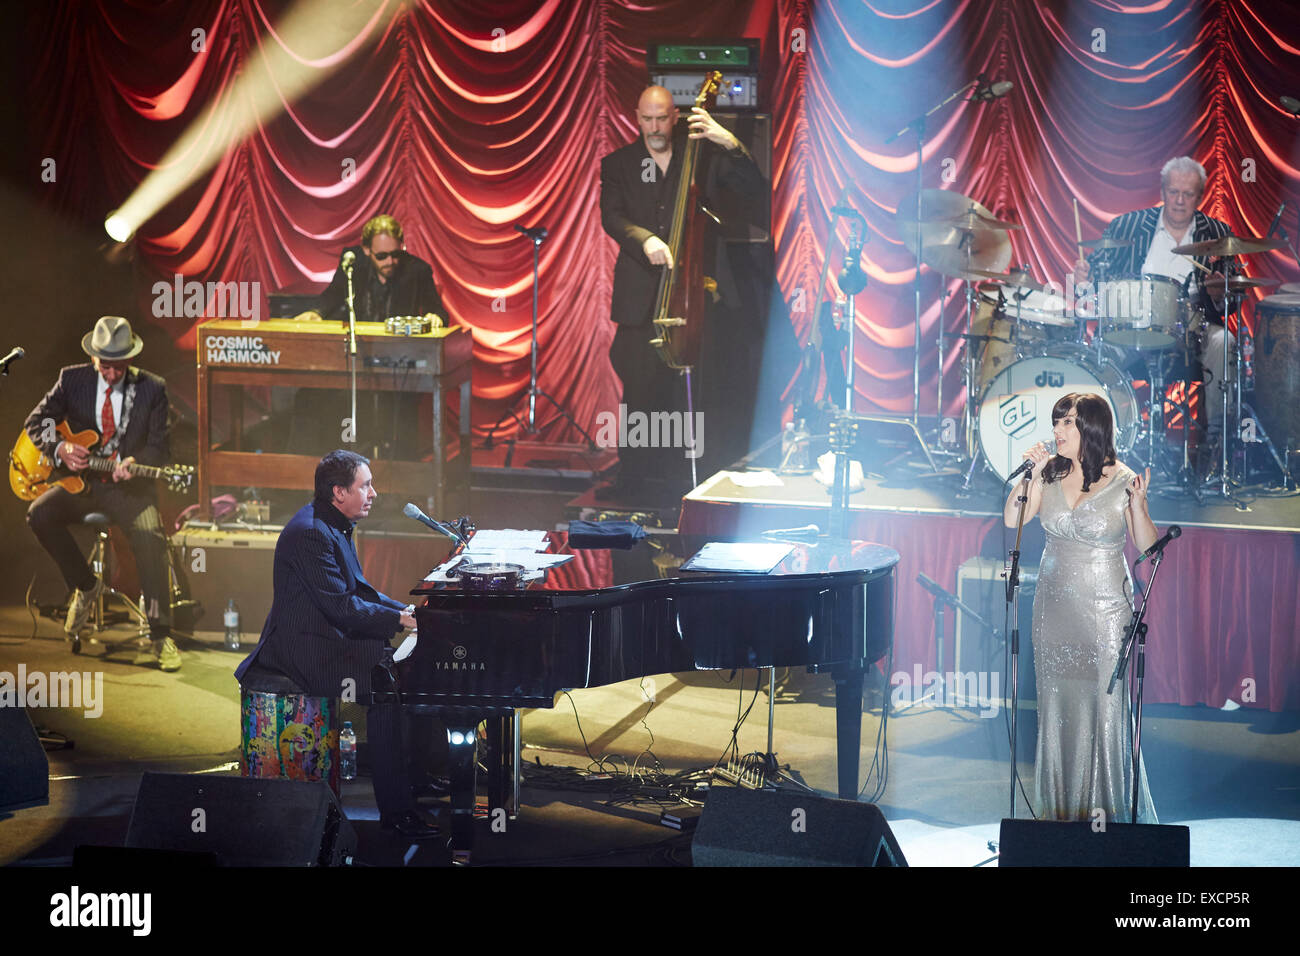 Jools Holland  Big band event at Blackpool's Winter Garden for  BBC television show   Singer Rumer, special guest Stock Photo